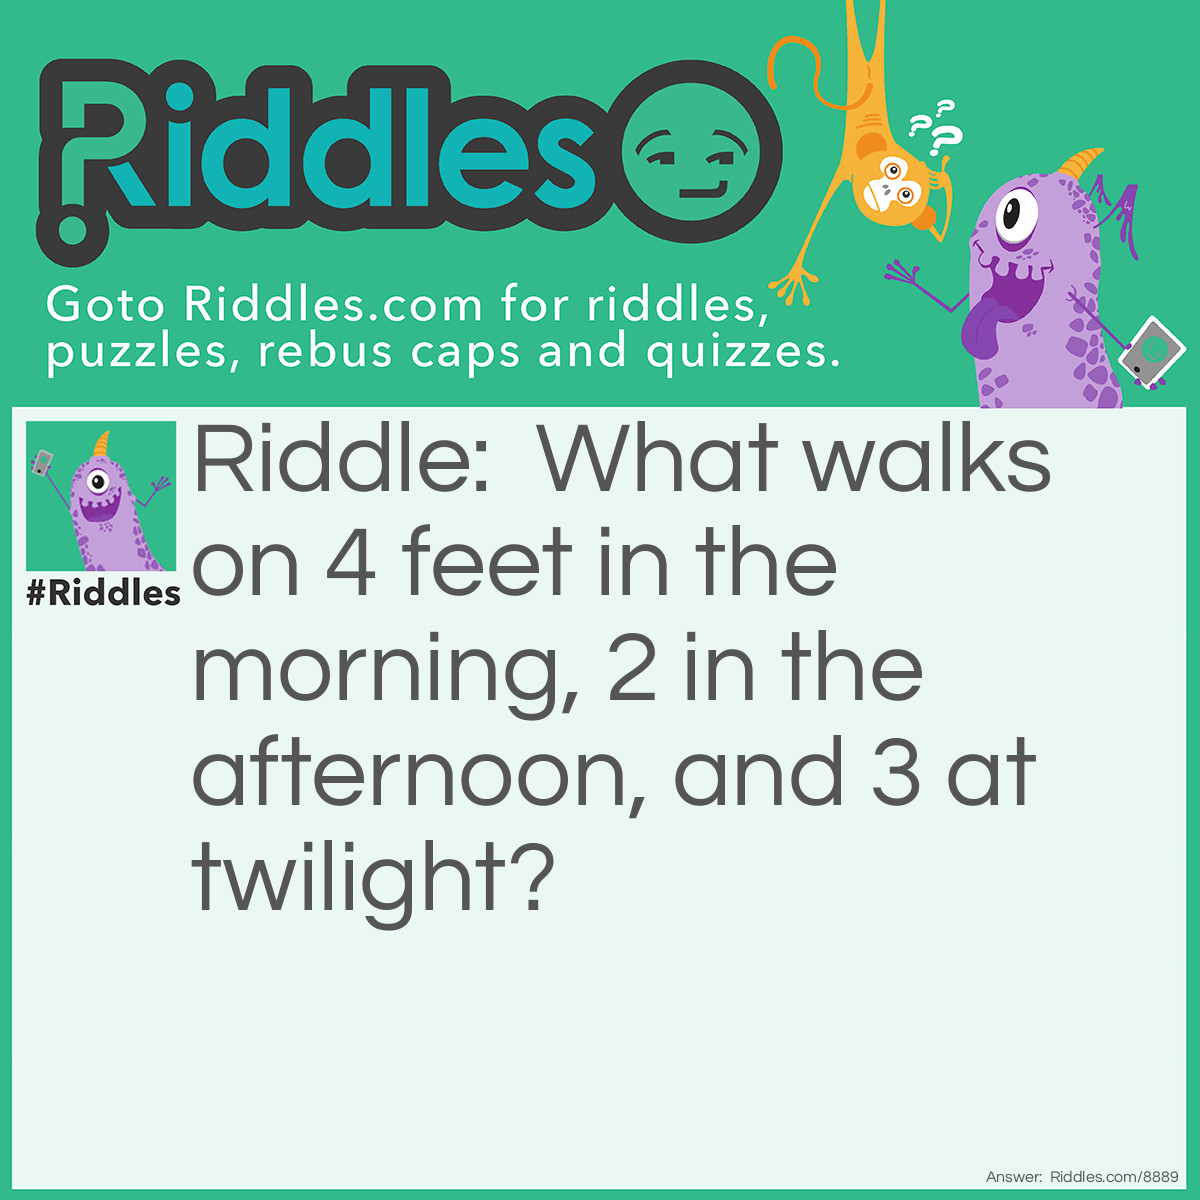 Riddle: What walks on 4 feet in the morning, 2 in the afternoon, and 3 at twilight? Answer: Man.